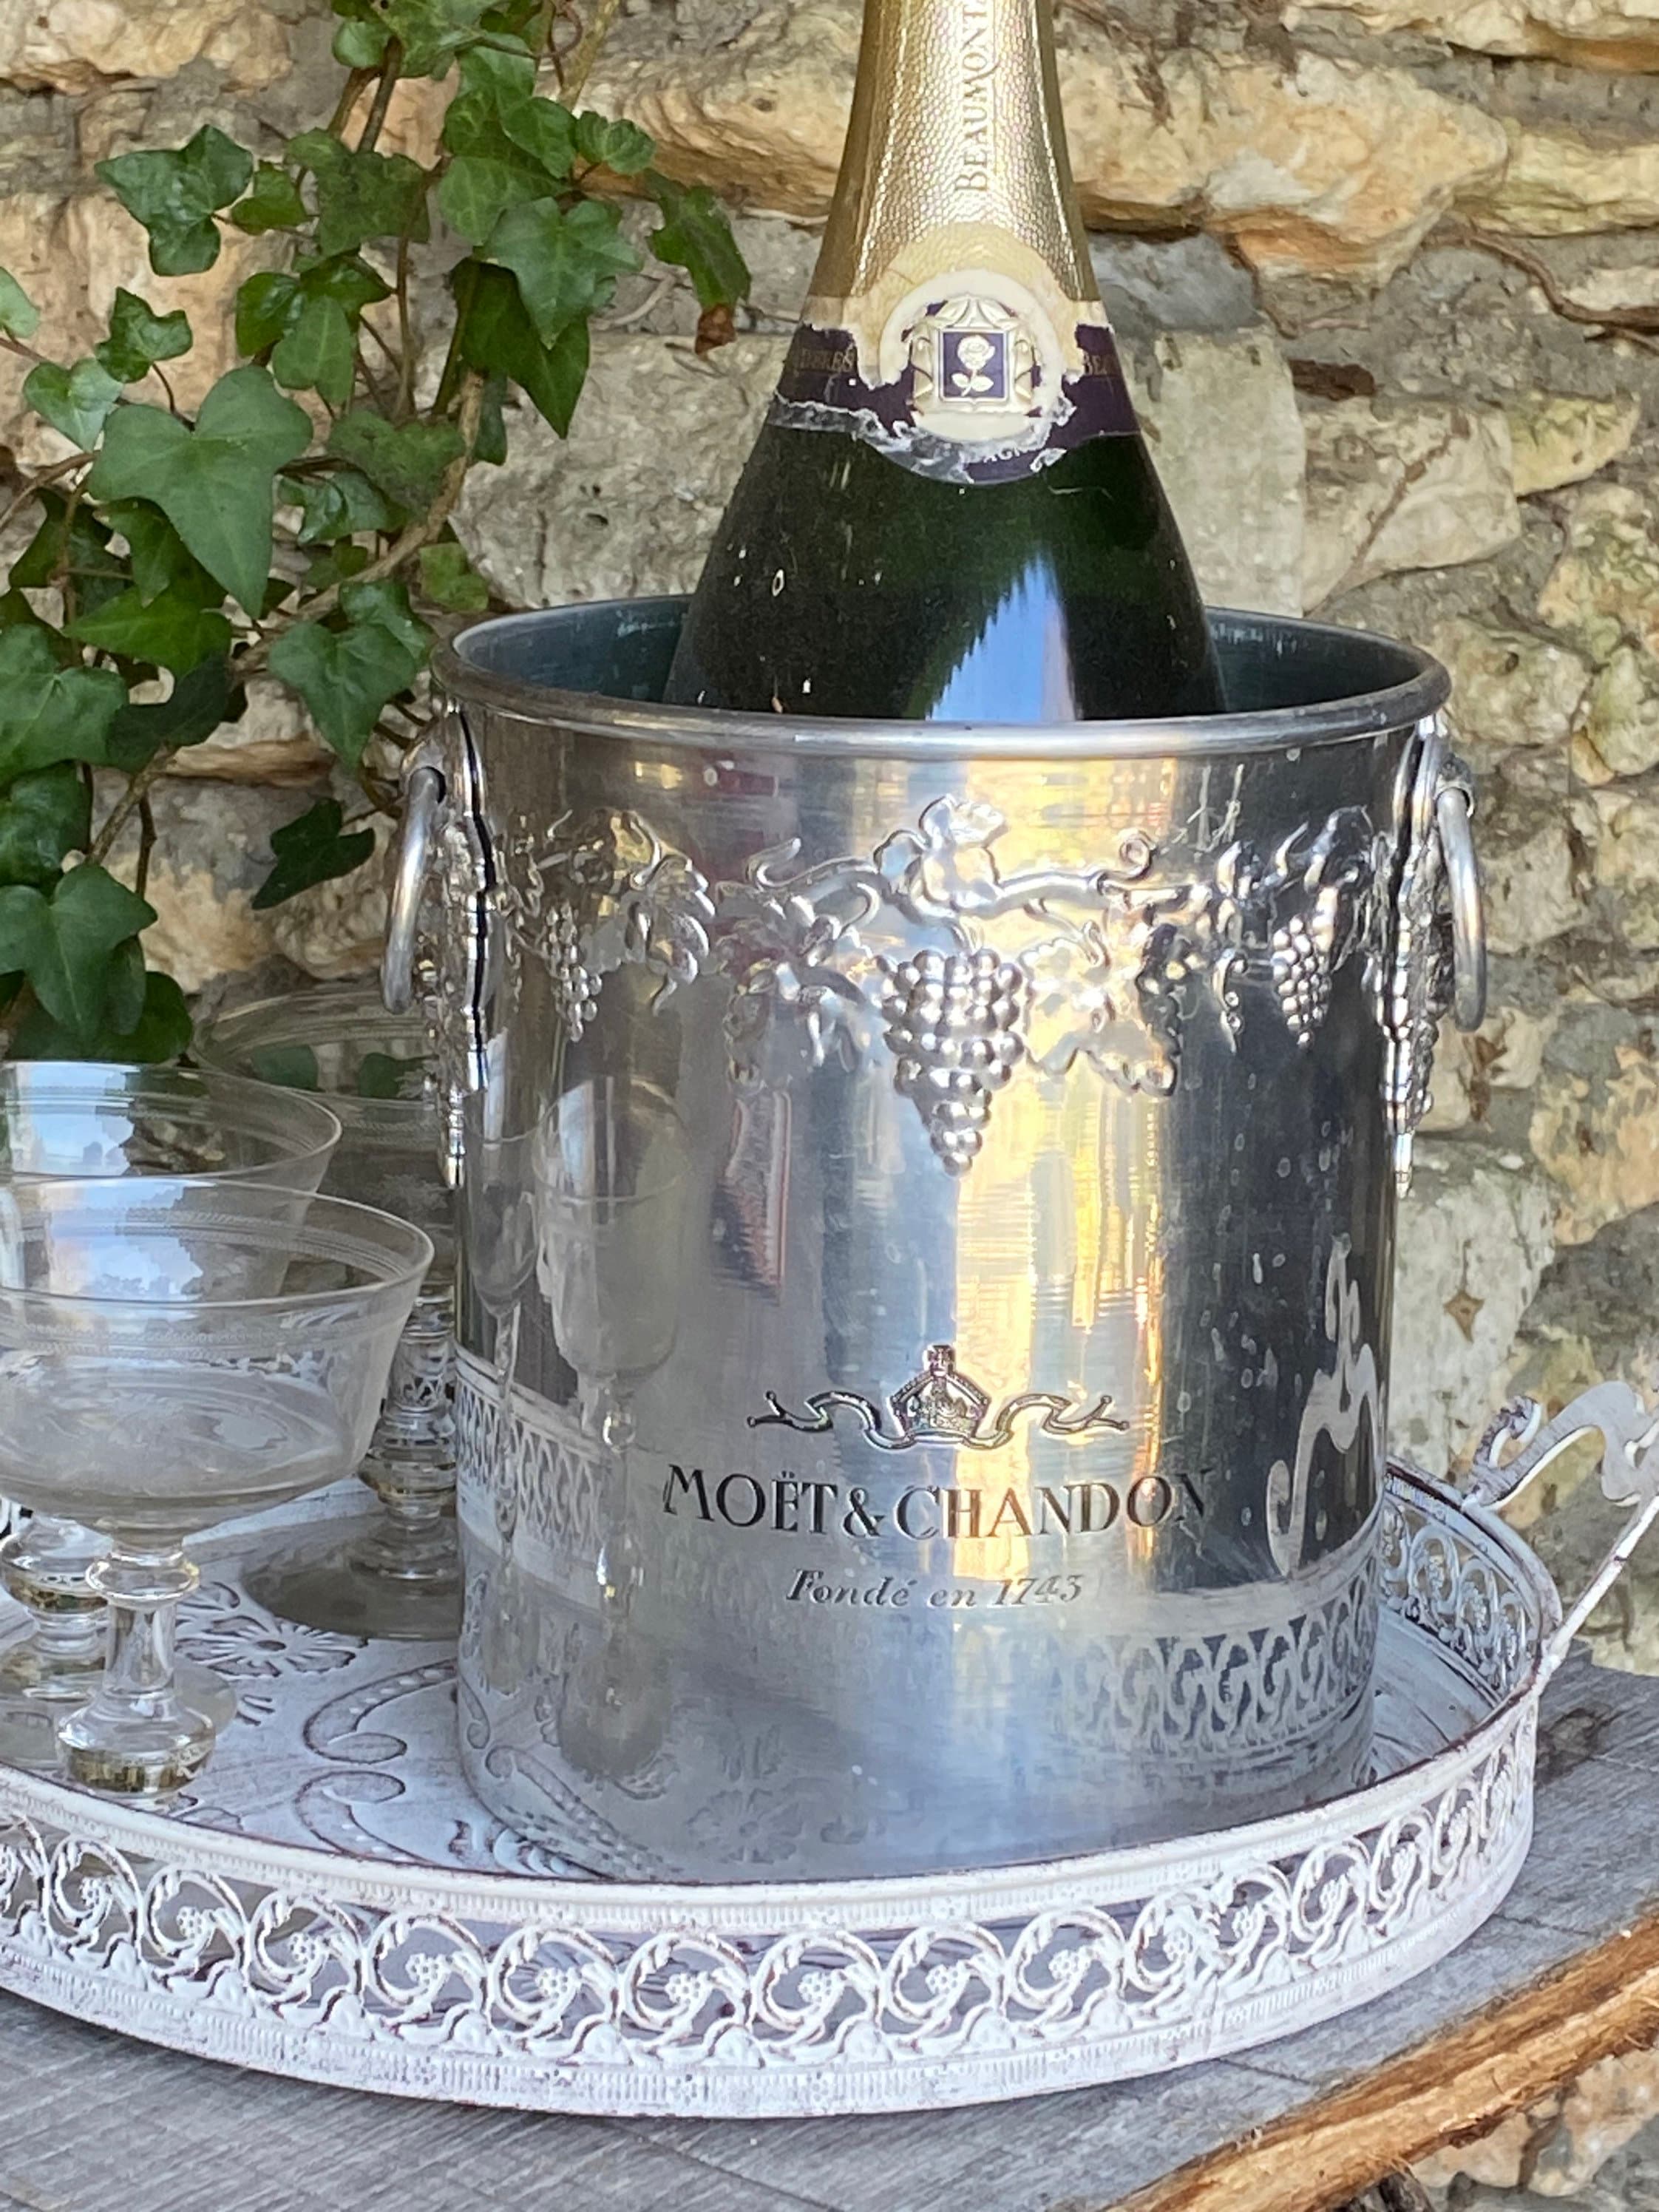 Limited Edition Branded Wine Accessories Plastic Moet Chandon Cooler Party Champagne  Bottle Bucket